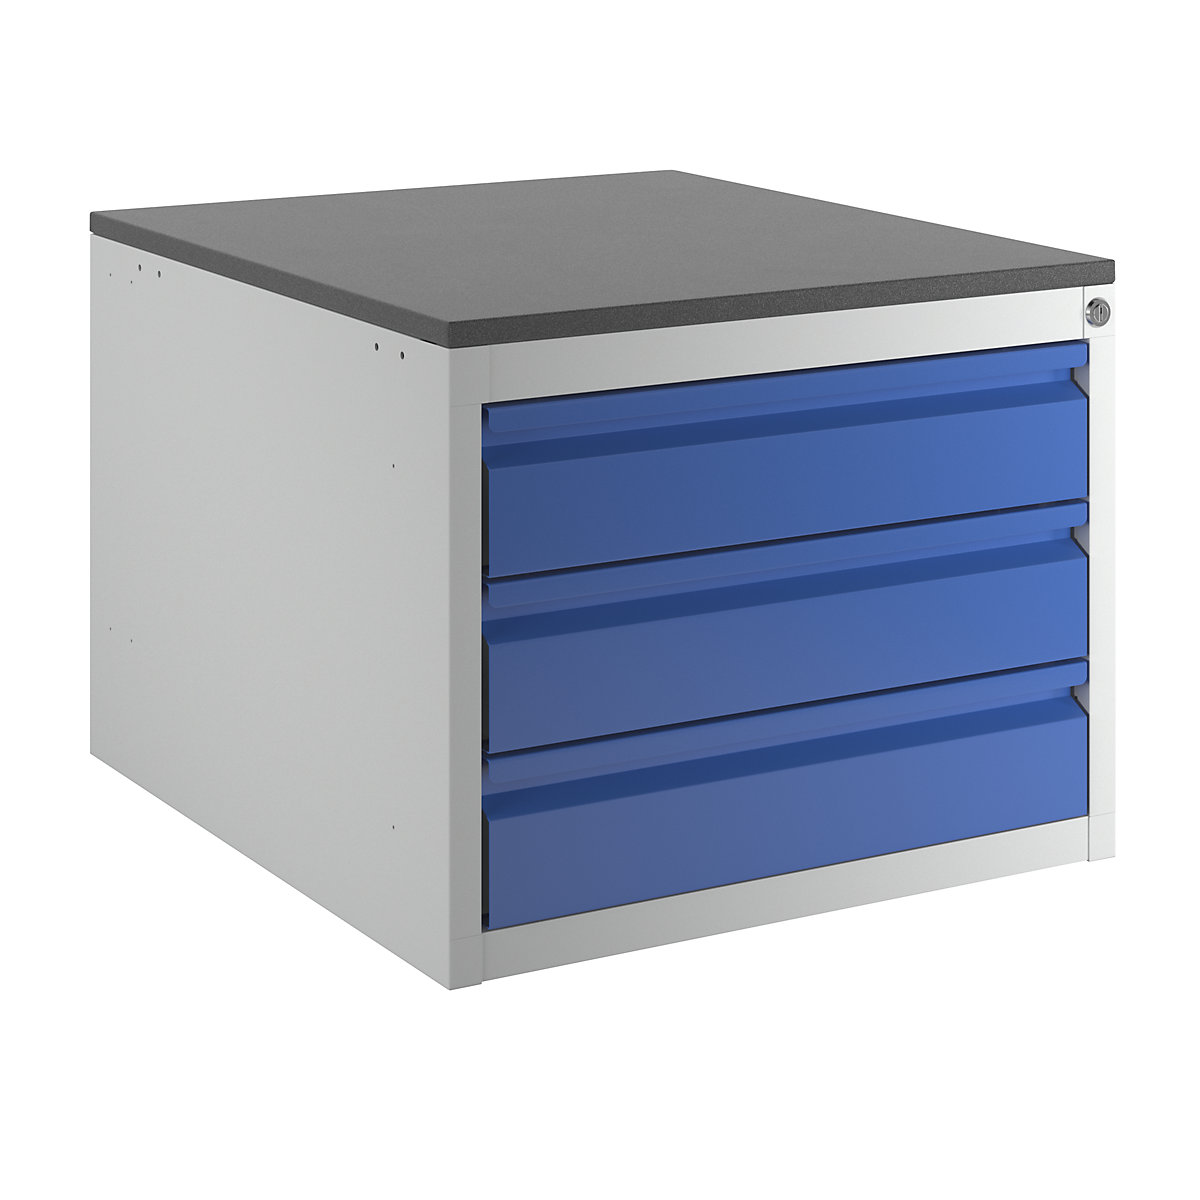 Drawer cupboard with telescopic guides – RAU, height 460 mm, 3 x 120 mm drawers, light grey / gentian blue, width 580 mm-8